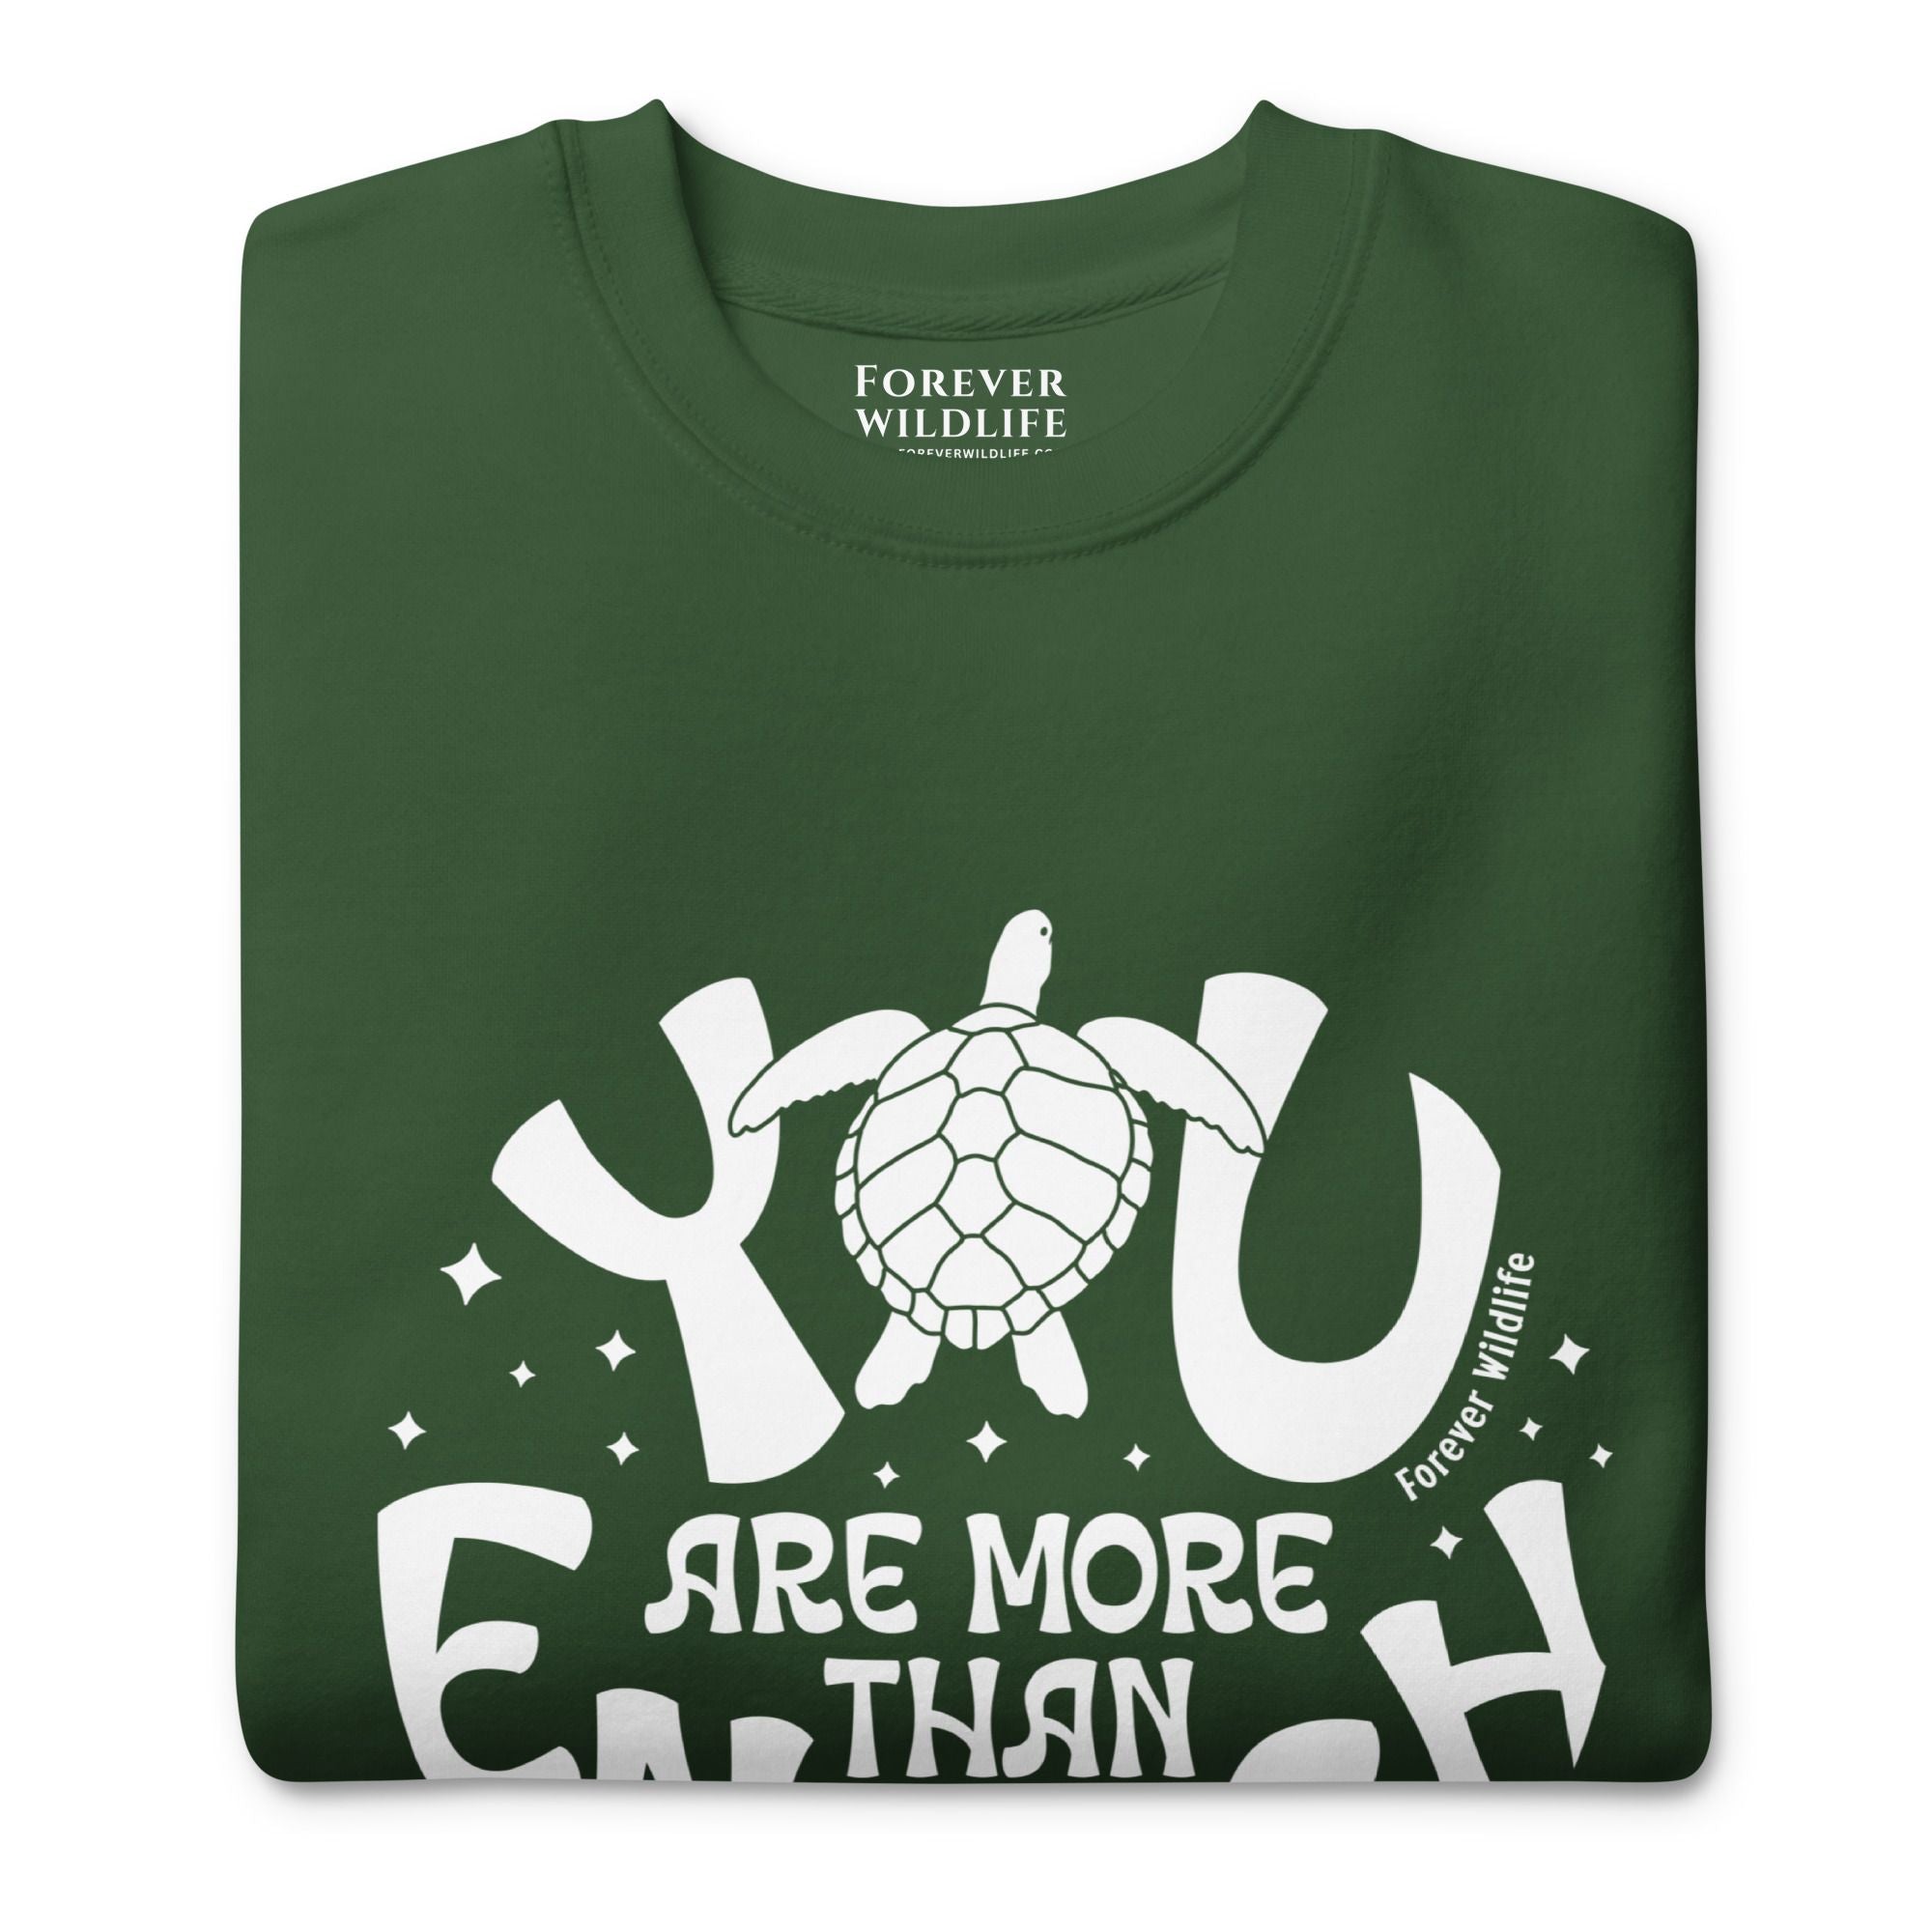 Sea Turtle Sweatshirt in Forest-Premium Wildlife Animal Inspiration Sweatshirt Design with 'You Are More Than Enough' text, part of Wildlife Sweatshirts & Clothing from Forever Wildlife.